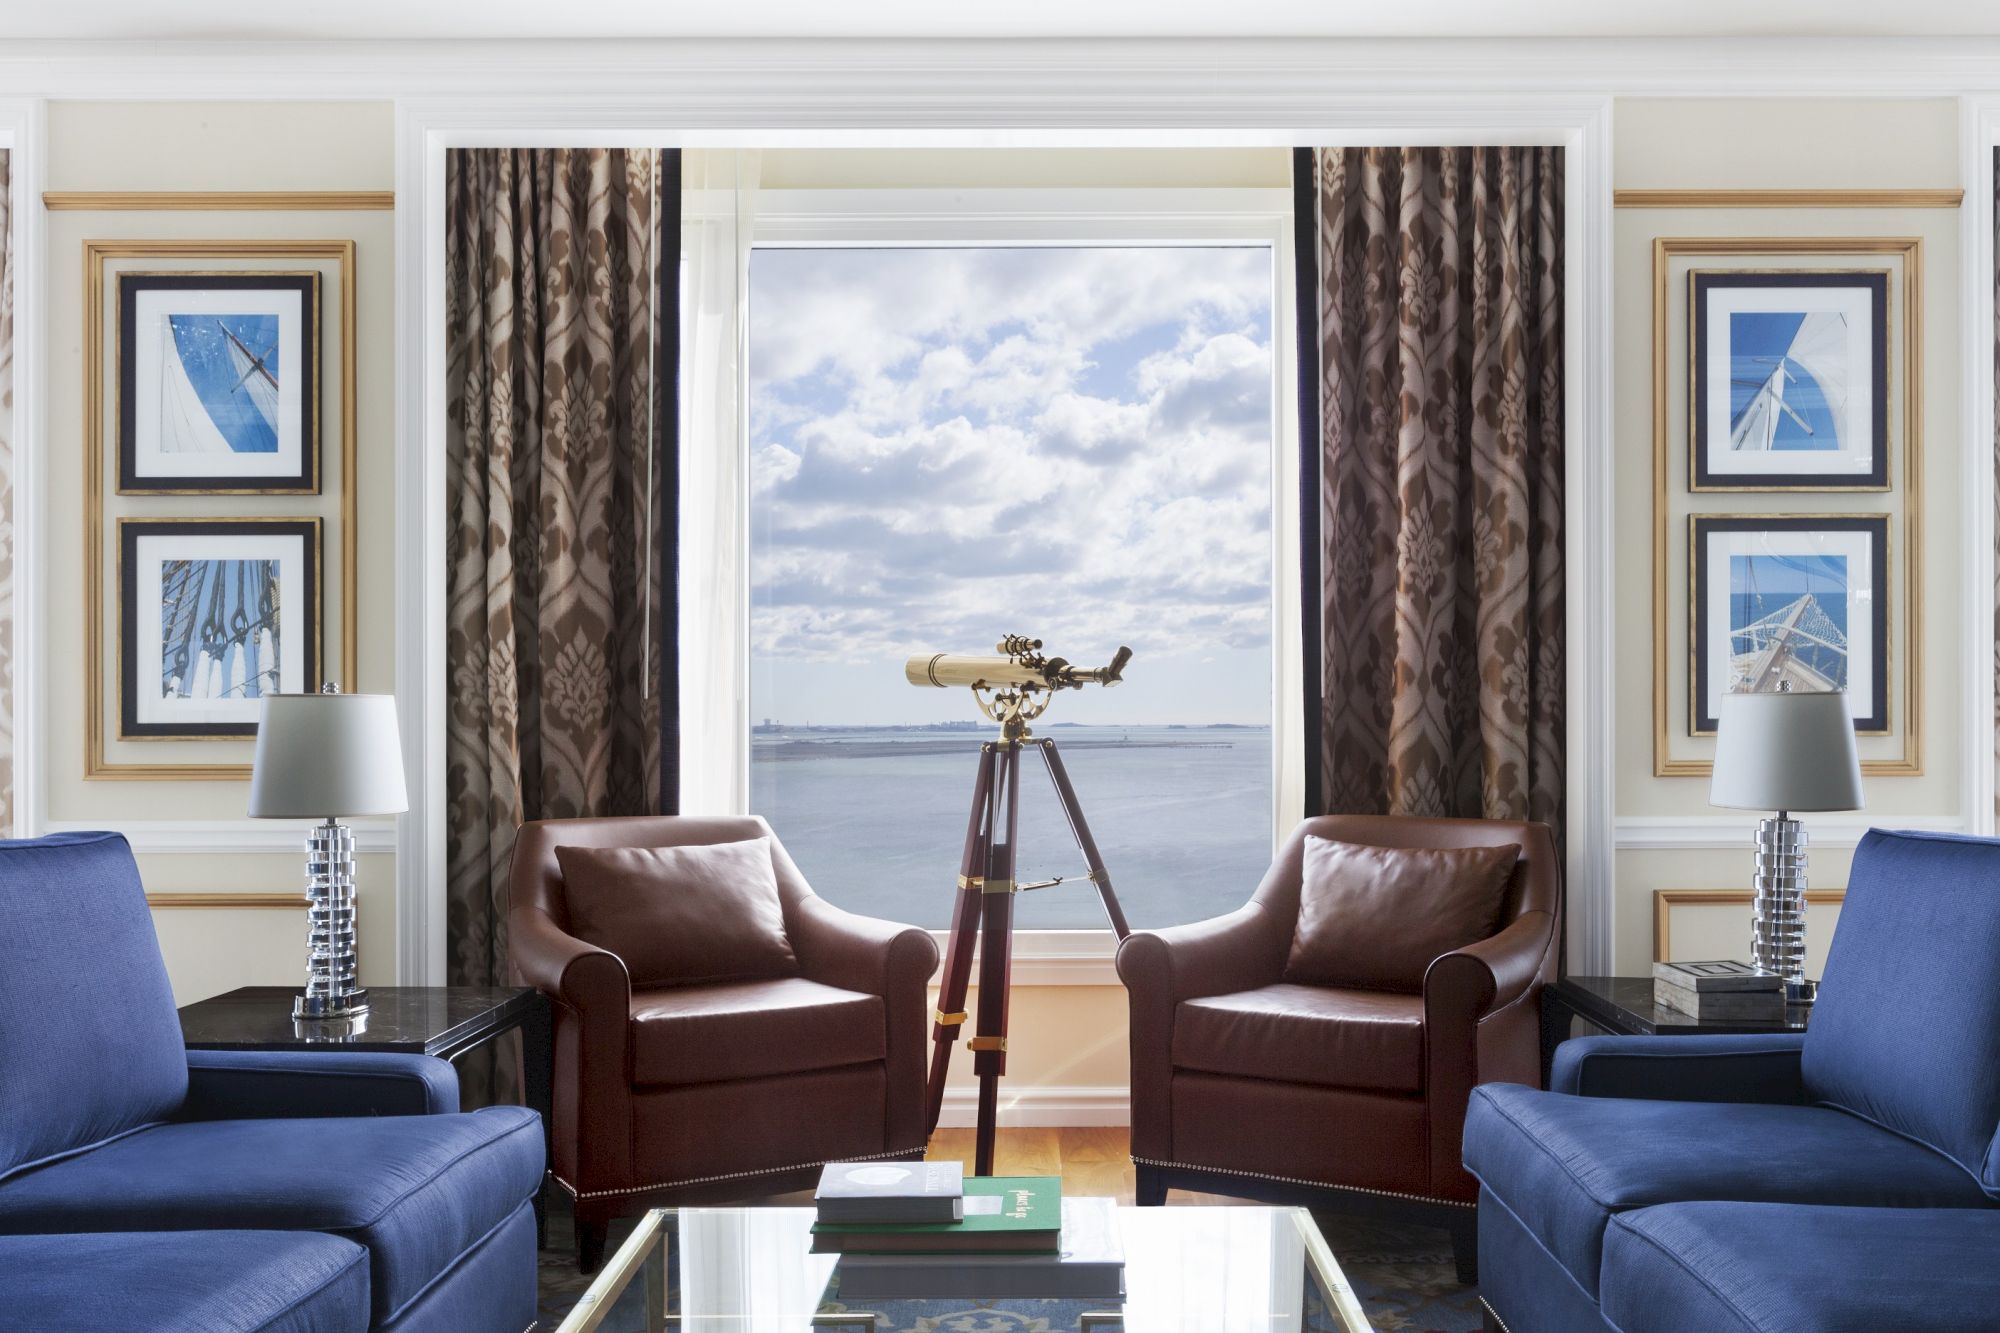 Elegant room with ocean view, two blue sofas, a telescope, and framed art.